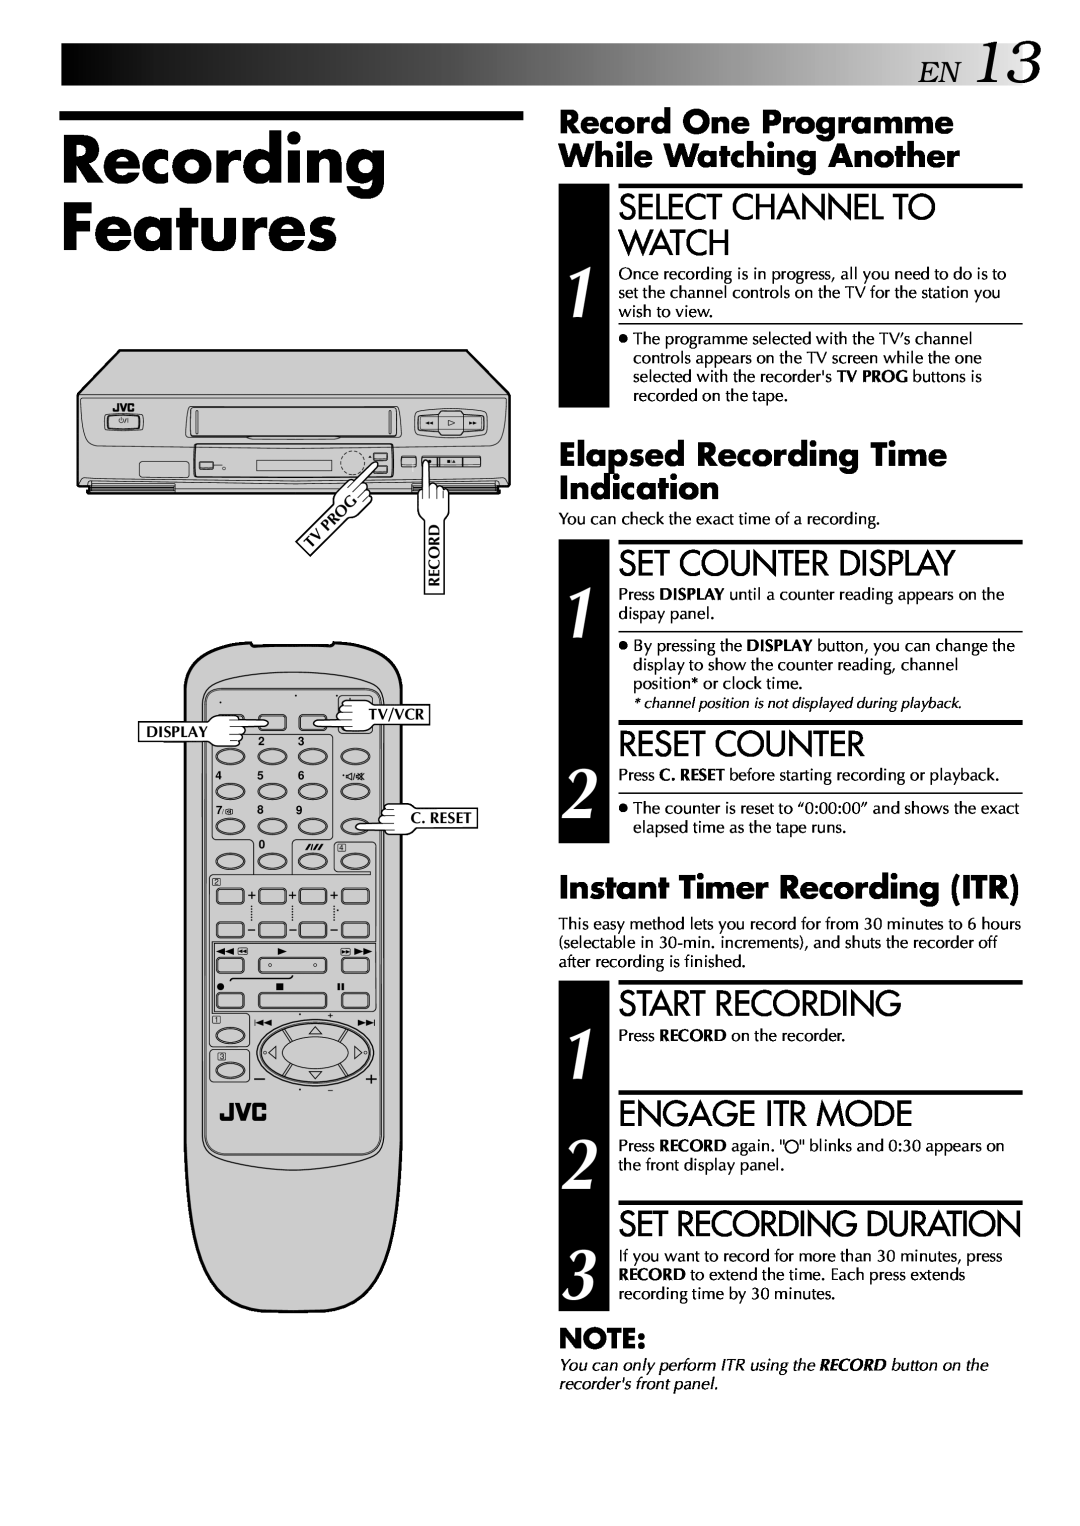 JVC HR-J245EA Recording Features, EN13, Select Channel To Watch, Set Counter Display, Reset Counter, Engage Itr Mode 